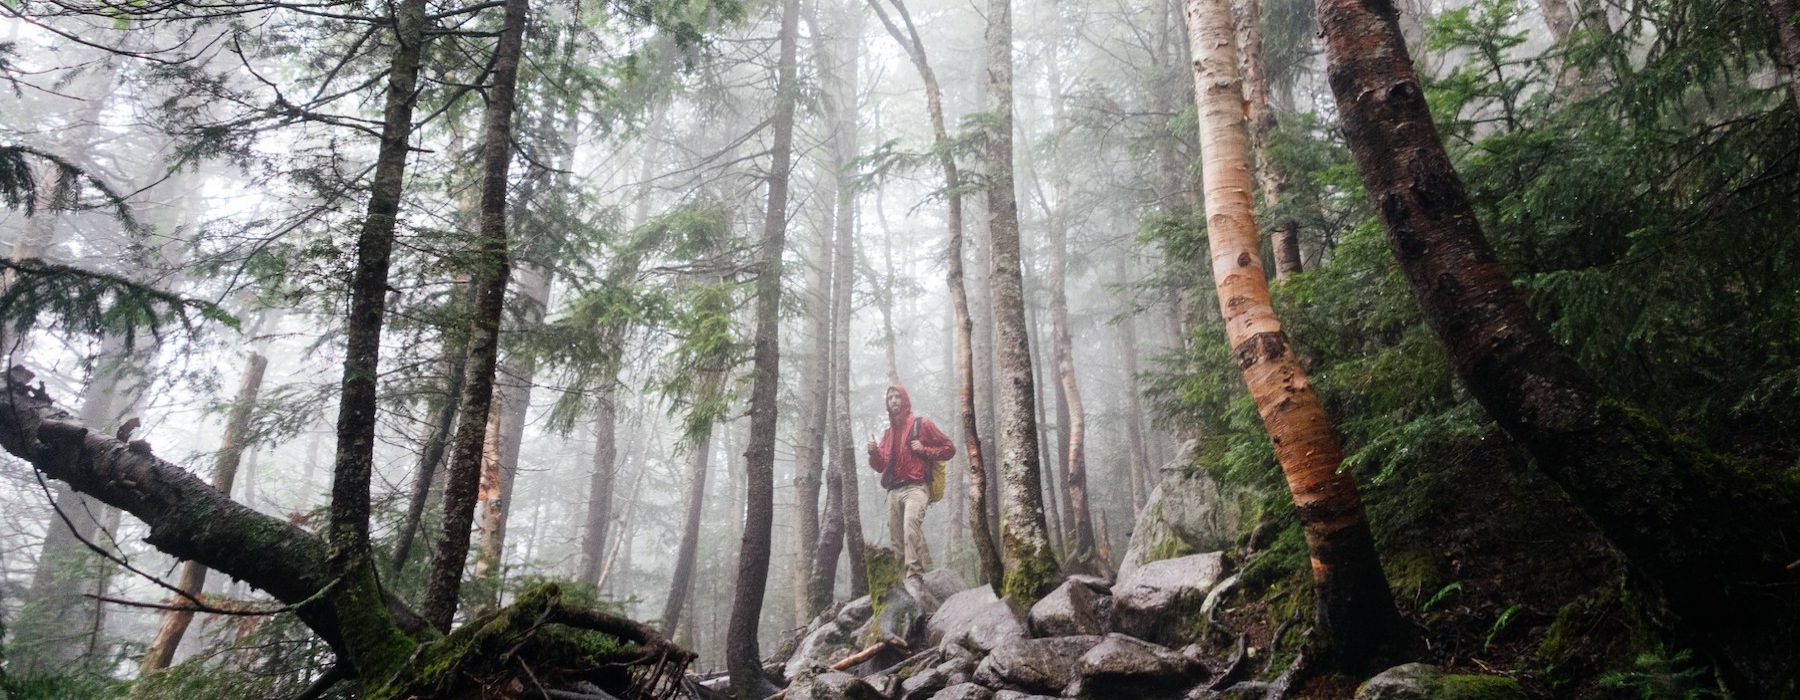 Man hiking in a hazey forest 